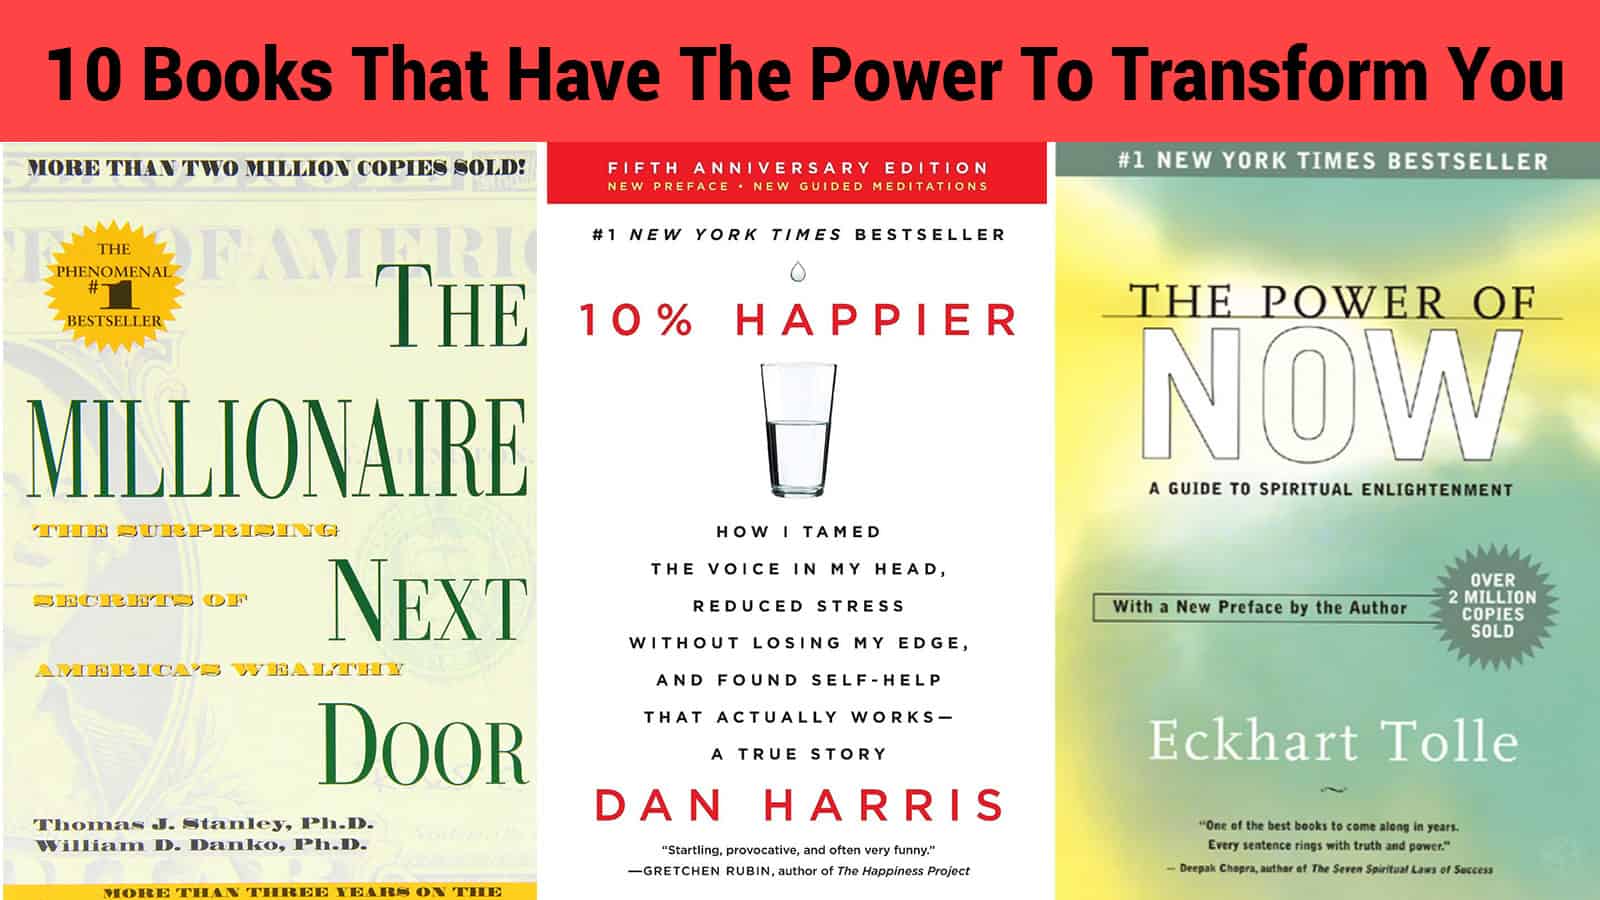 1579699059_10-Books-That-Have-The-Power-To-Transform-You.jpg